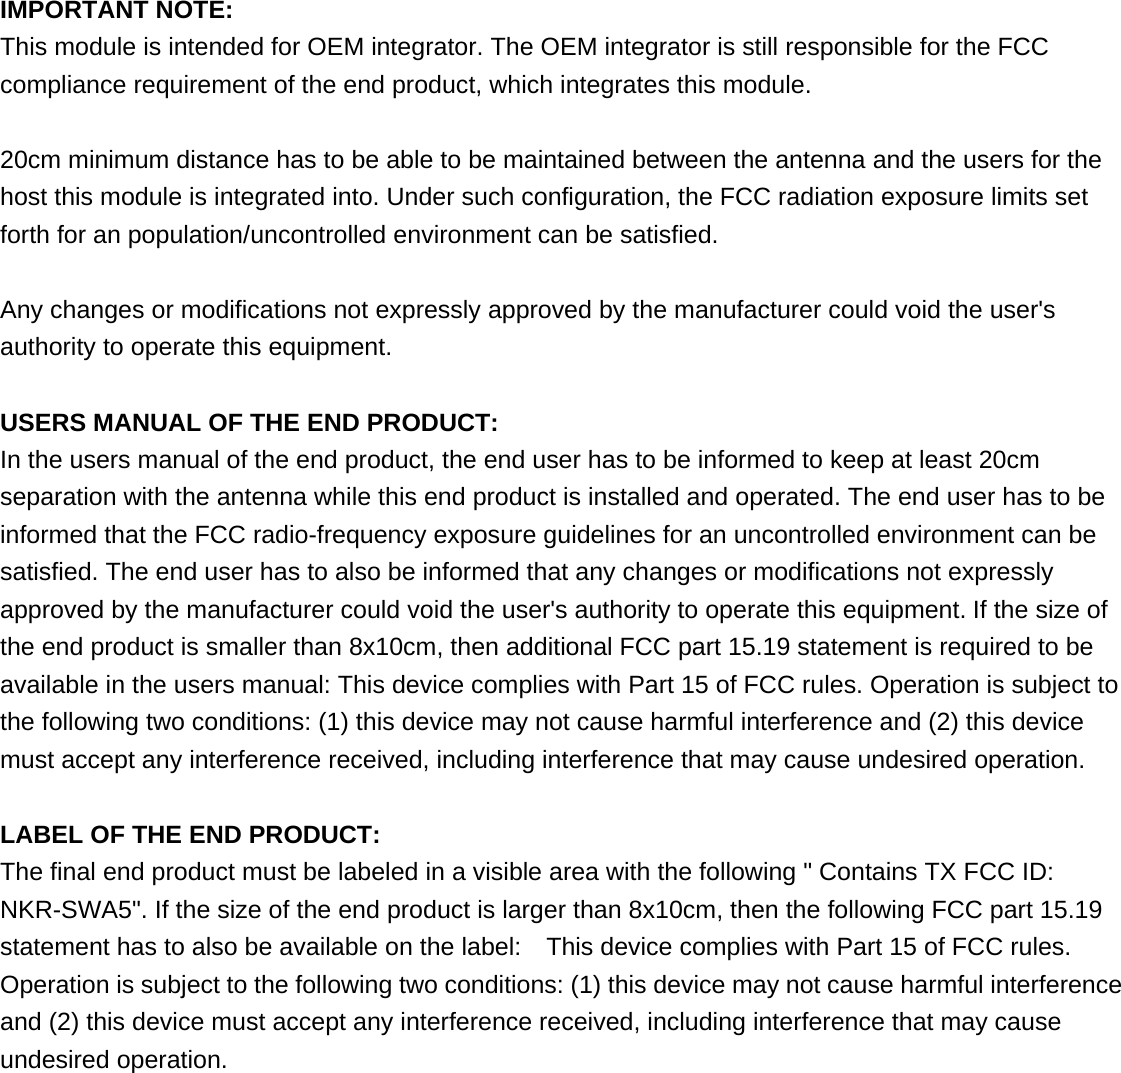  IMPORTANT NOTE: This module is intended for OEM integrator. The OEM integrator is still responsible for the FCC compliance requirement of the end product, which integrates this module.  20cm minimum distance has to be able to be maintained between the antenna and the users for the host this module is integrated into. Under such configuration, the FCC radiation exposure limits set forth for an population/uncontrolled environment can be satisfied.    Any changes or modifications not expressly approved by the manufacturer could void the user&apos;s authority to operate this equipment.  USERS MANUAL OF THE END PRODUCT: In the users manual of the end product, the end user has to be informed to keep at least 20cm separation with the antenna while this end product is installed and operated. The end user has to be informed that the FCC radio-frequency exposure guidelines for an uncontrolled environment can be satisfied. The end user has to also be informed that any changes or modifications not expressly approved by the manufacturer could void the user&apos;s authority to operate this equipment. If the size of the end product is smaller than 8x10cm, then additional FCC part 15.19 statement is required to be available in the users manual: This device complies with Part 15 of FCC rules. Operation is subject to the following two conditions: (1) this device may not cause harmful interference and (2) this device must accept any interference received, including interference that may cause undesired operation.  LABEL OF THE END PRODUCT: The final end product must be labeled in a visible area with the following &quot; Contains TX FCC ID: NKR-SWA5&quot;. If the size of the end product is larger than 8x10cm, then the following FCC part 15.19 statement has to also be available on the label:    This device complies with Part 15 of FCC rules. Operation is subject to the following two conditions: (1) this device may not cause harmful interference and (2) this device must accept any interference received, including interference that may cause undesired operation.       